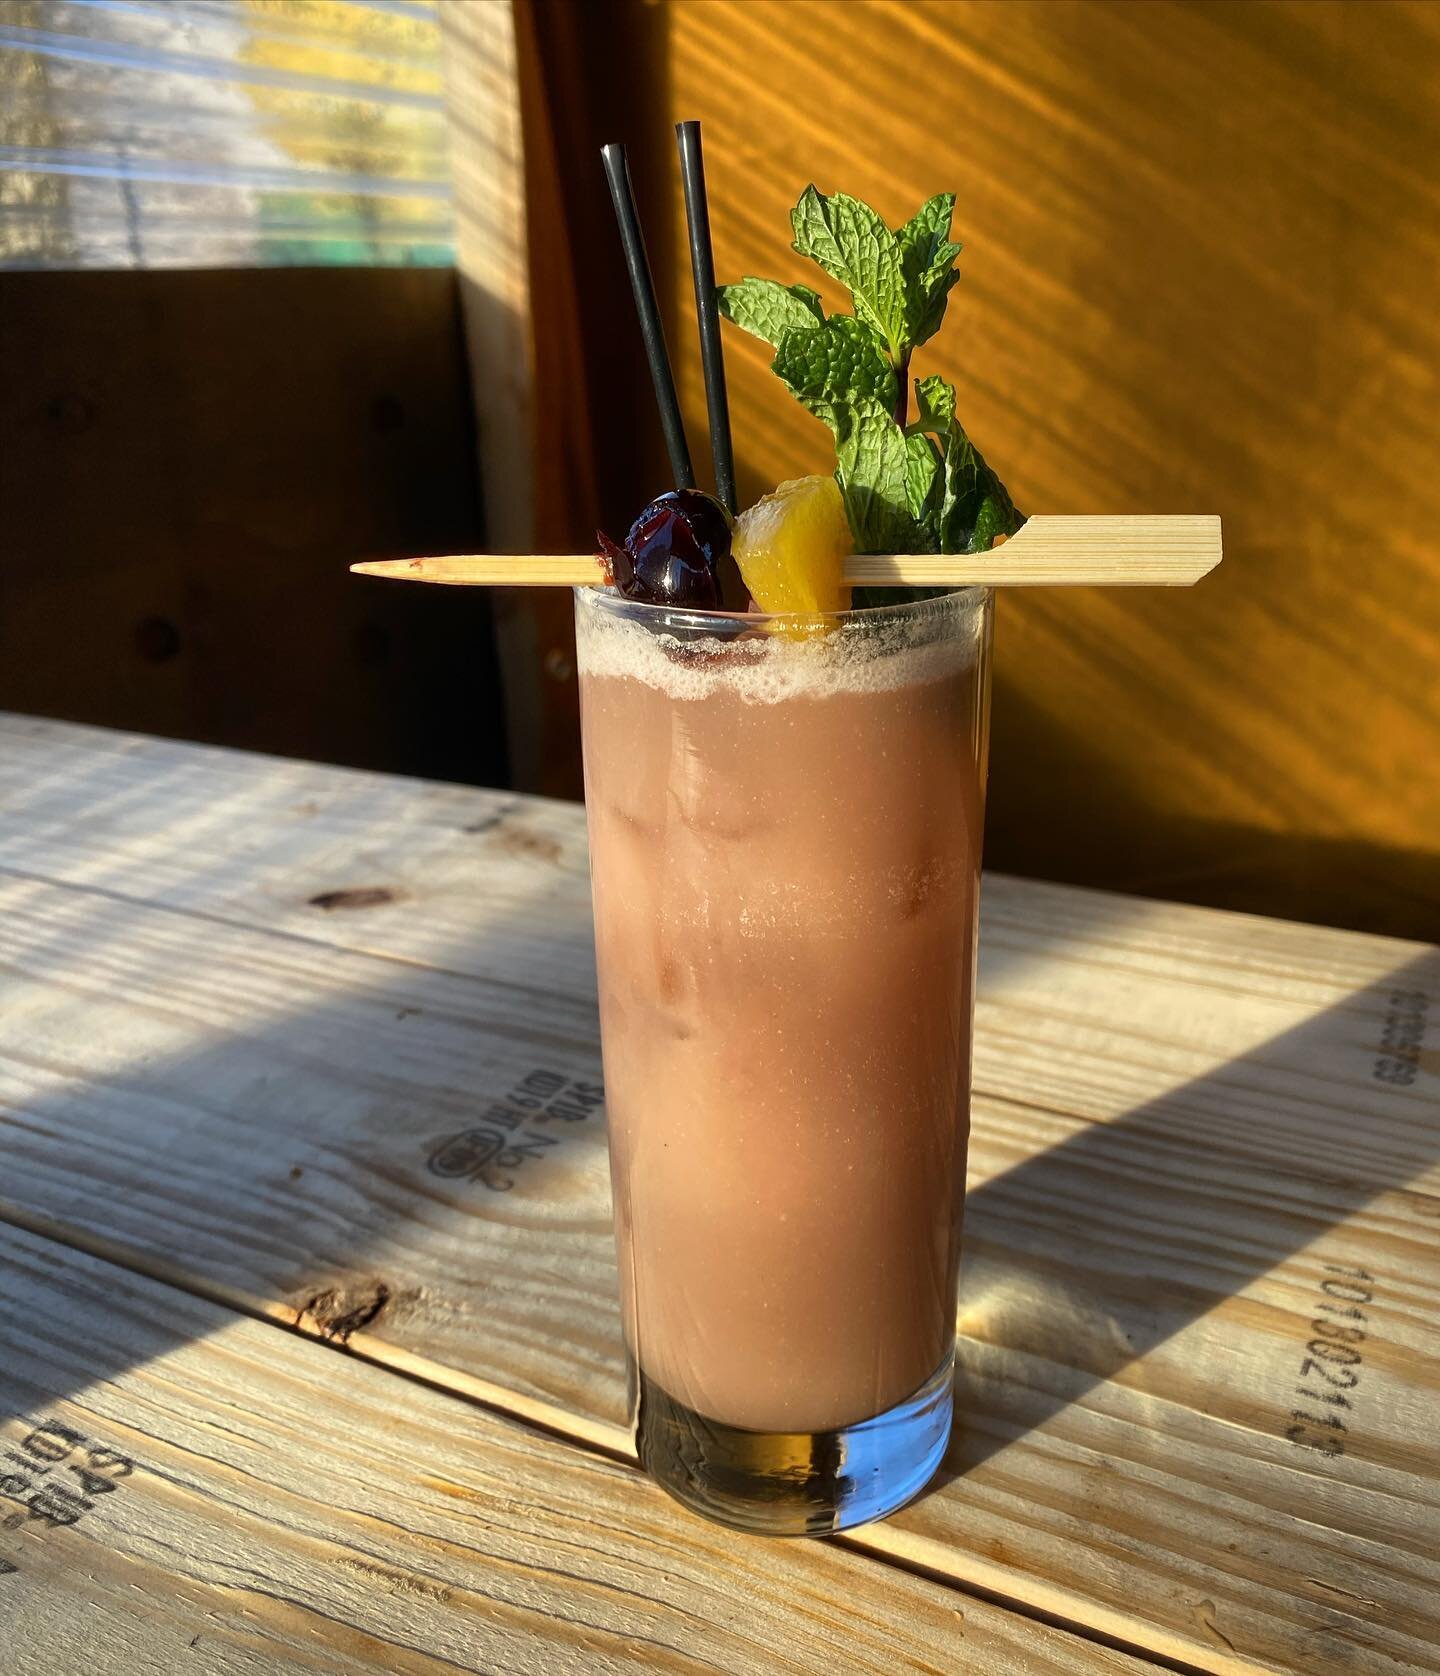 Sun&rsquo;s out! That means it&rsquo;s time to &ldquo;Skip into Spring&rdquo; with a patio pounder!

&ldquo;Skip into Spring&rdquo;
- @skiprock belle rose rum + spiced apple liqueur
- toasted coconut / walnut simple
- lime + pineapple + cherry 

🍻💕